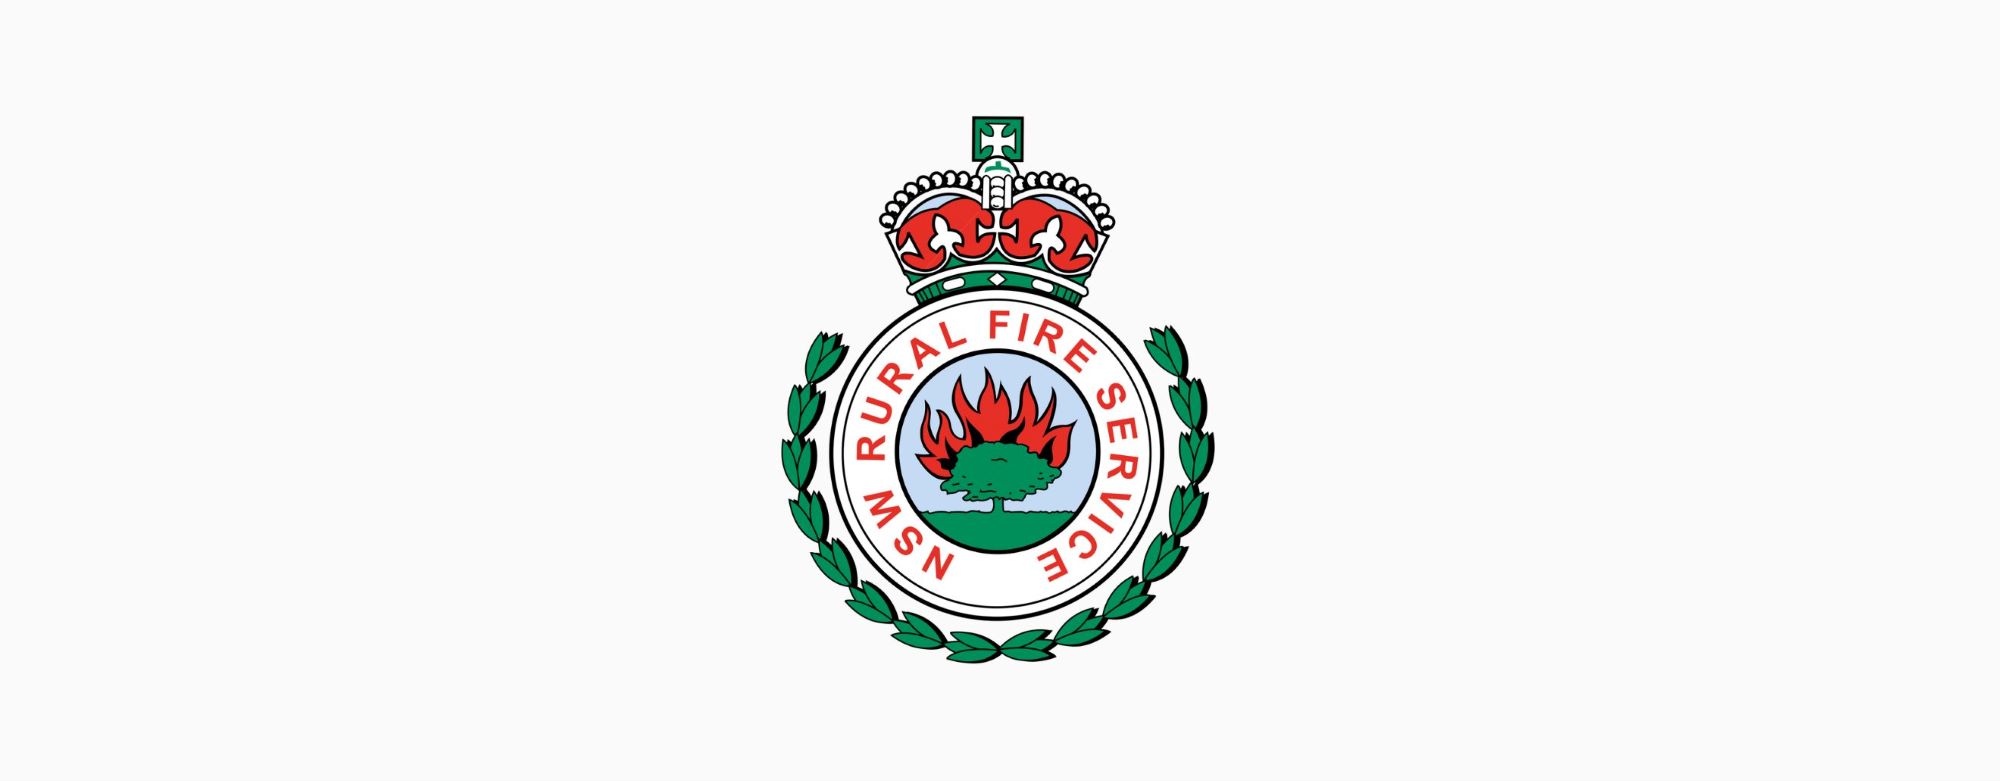 The official NSW Rural Fire Service (RFS) logo.